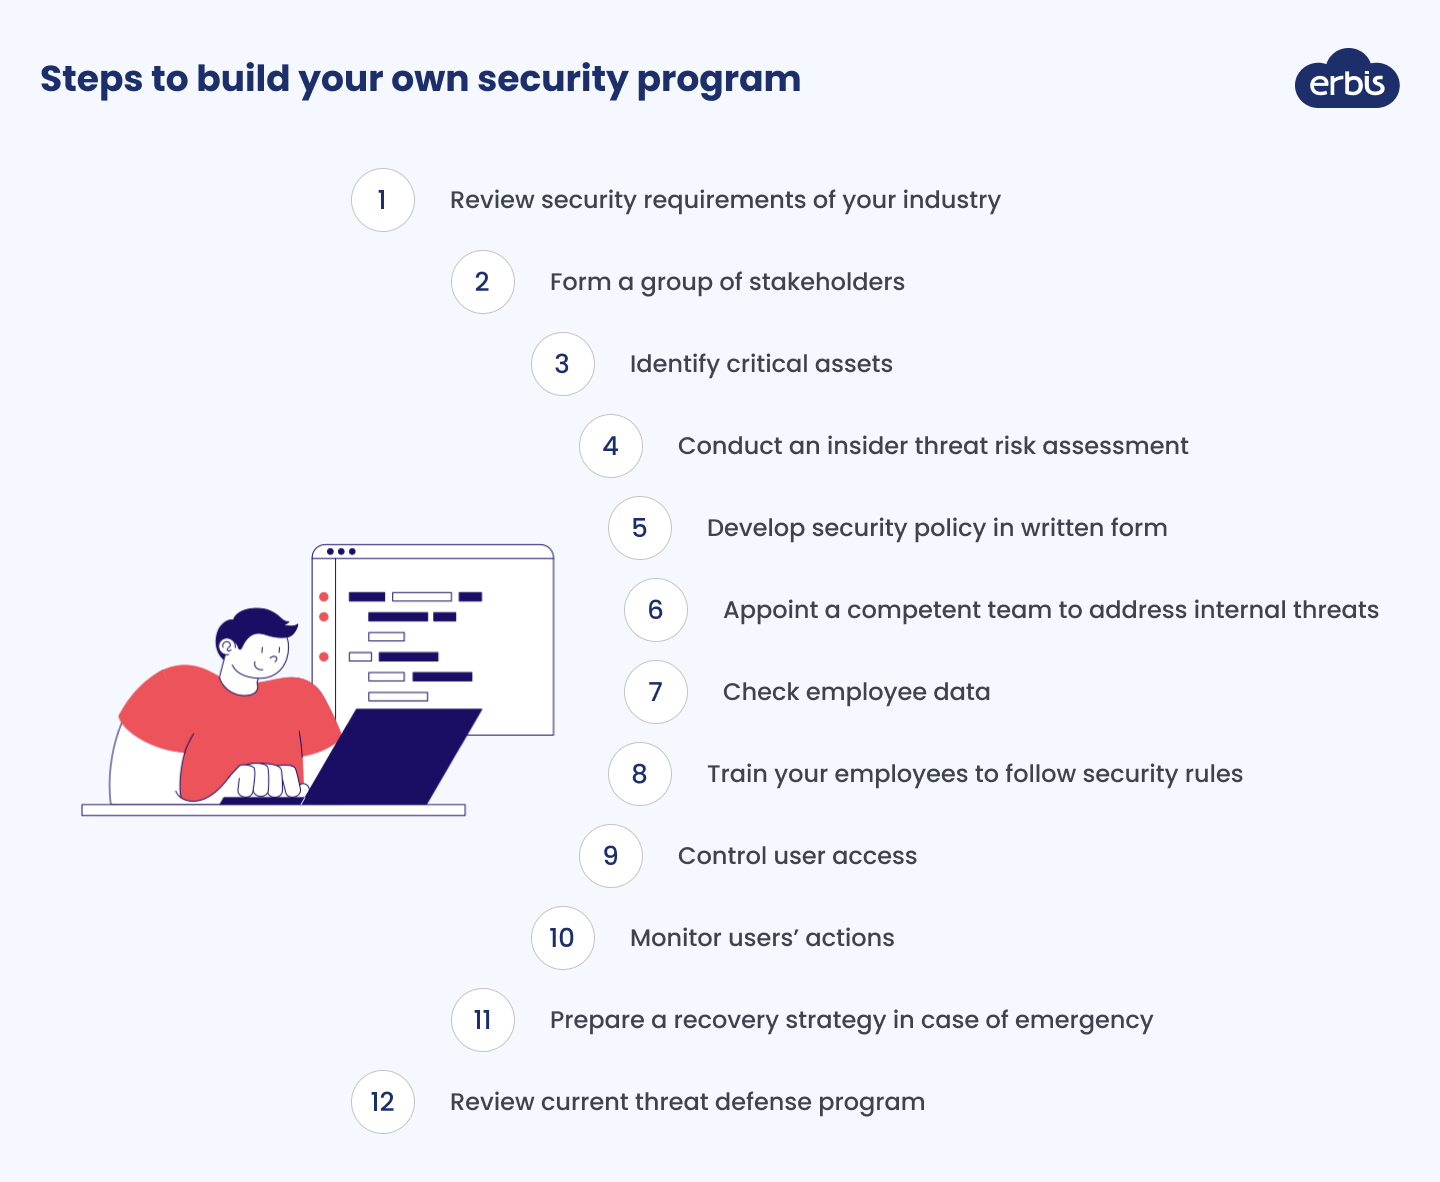 How to build your security program